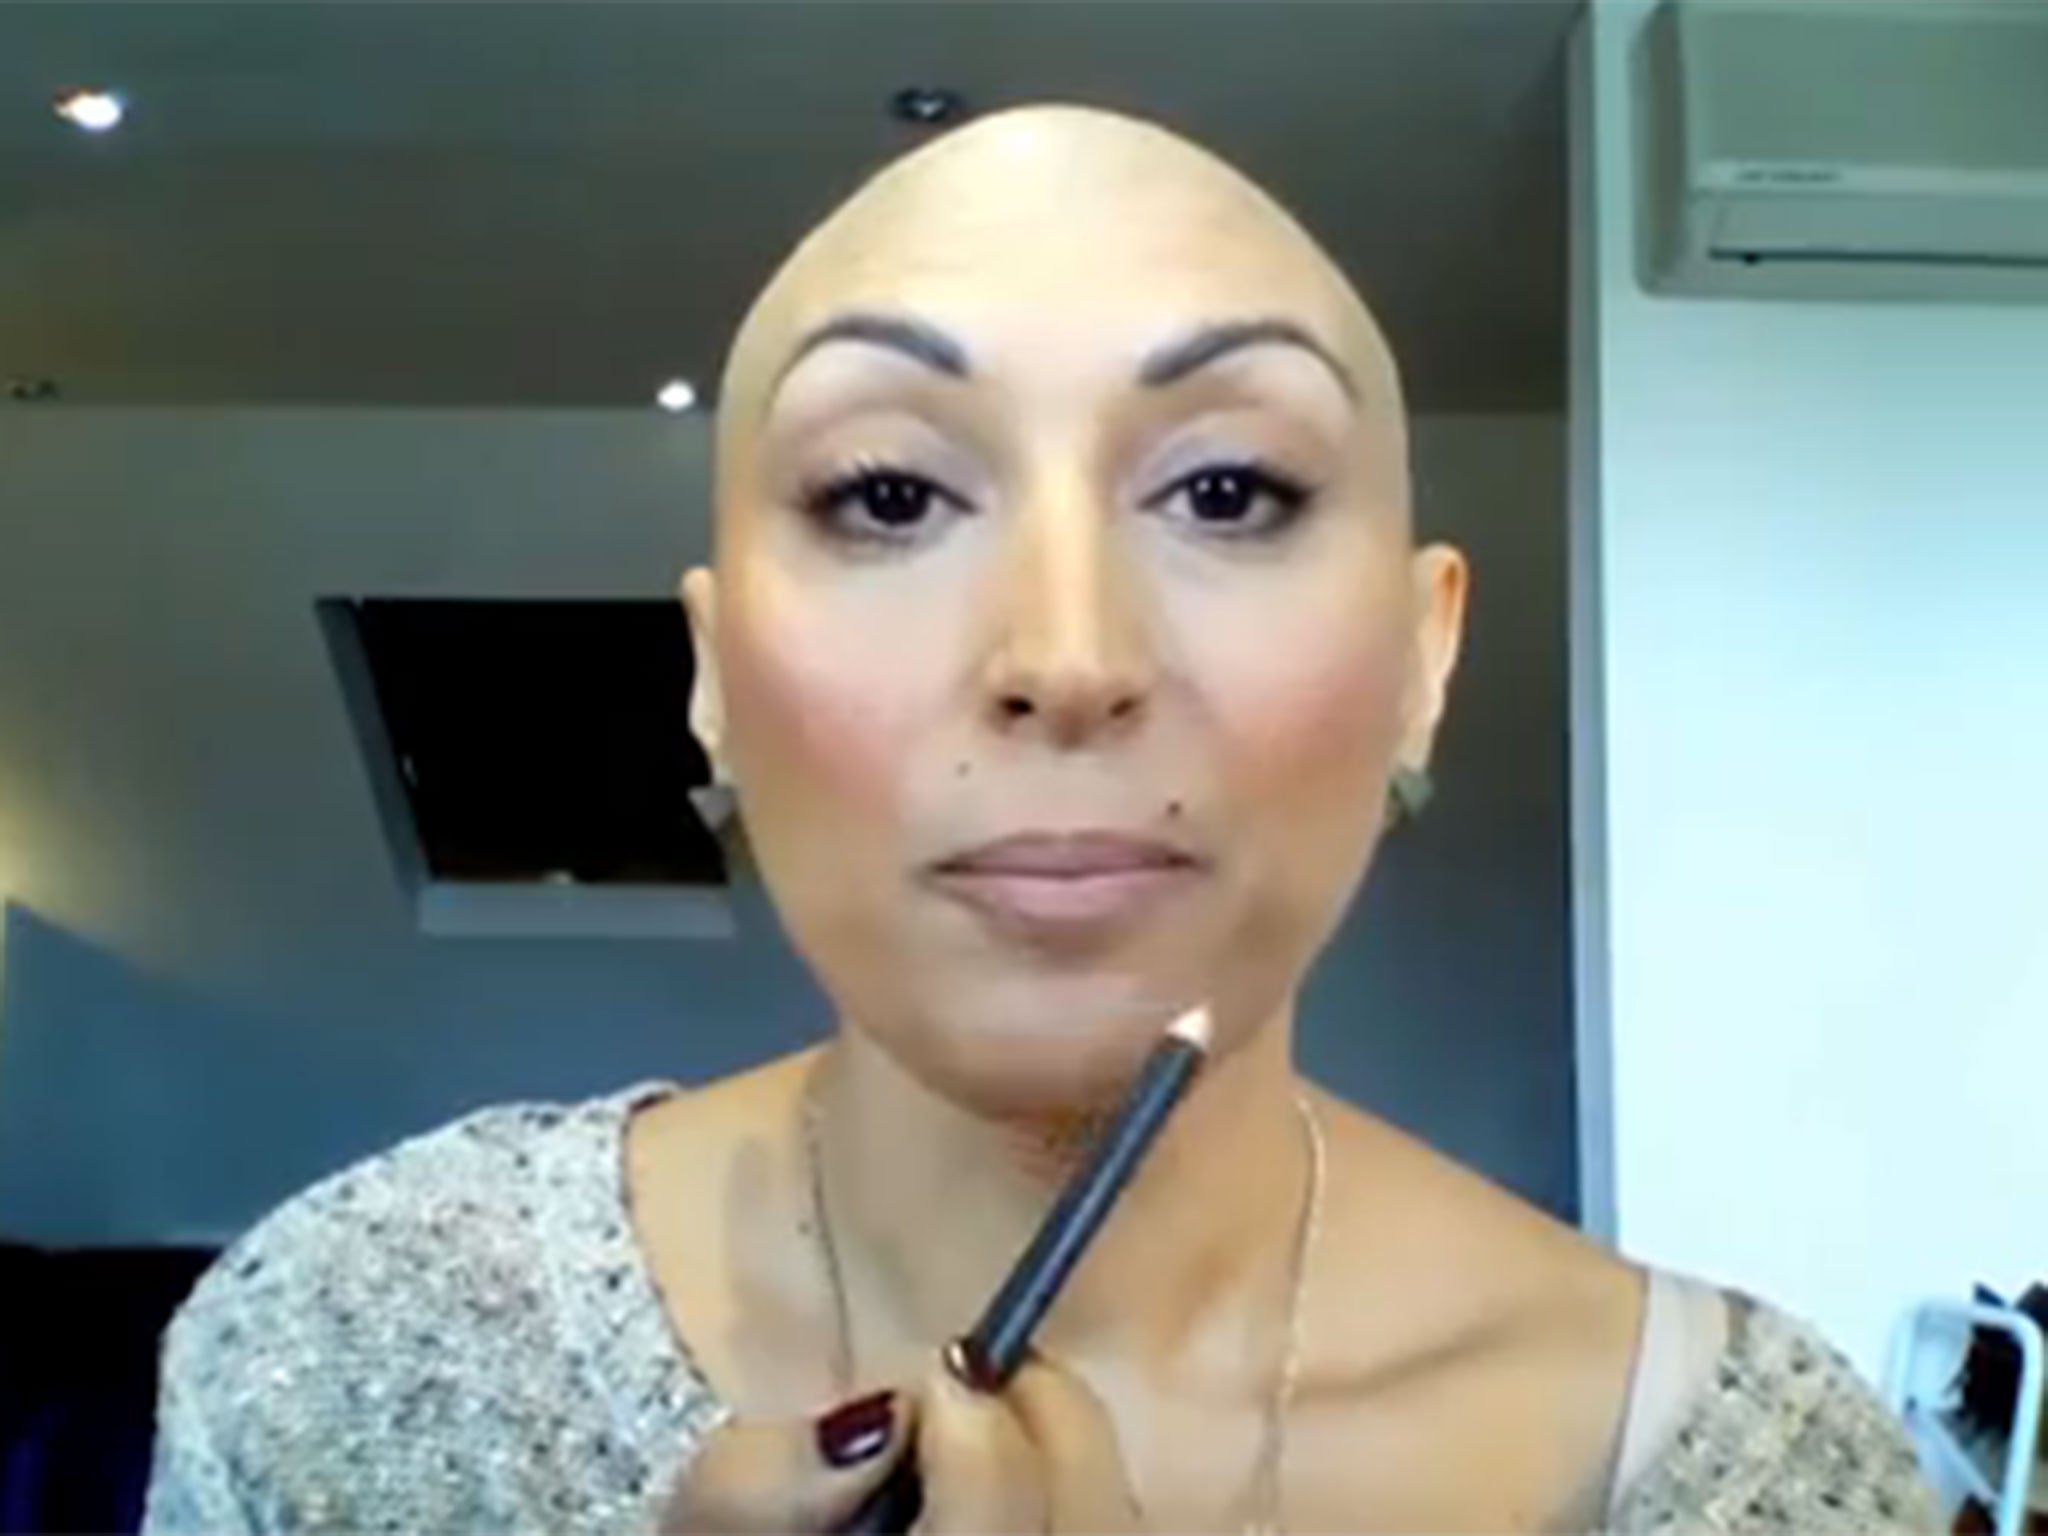 Andrea Pelligrini's video tutorials are helping women cope with chemotherapy.